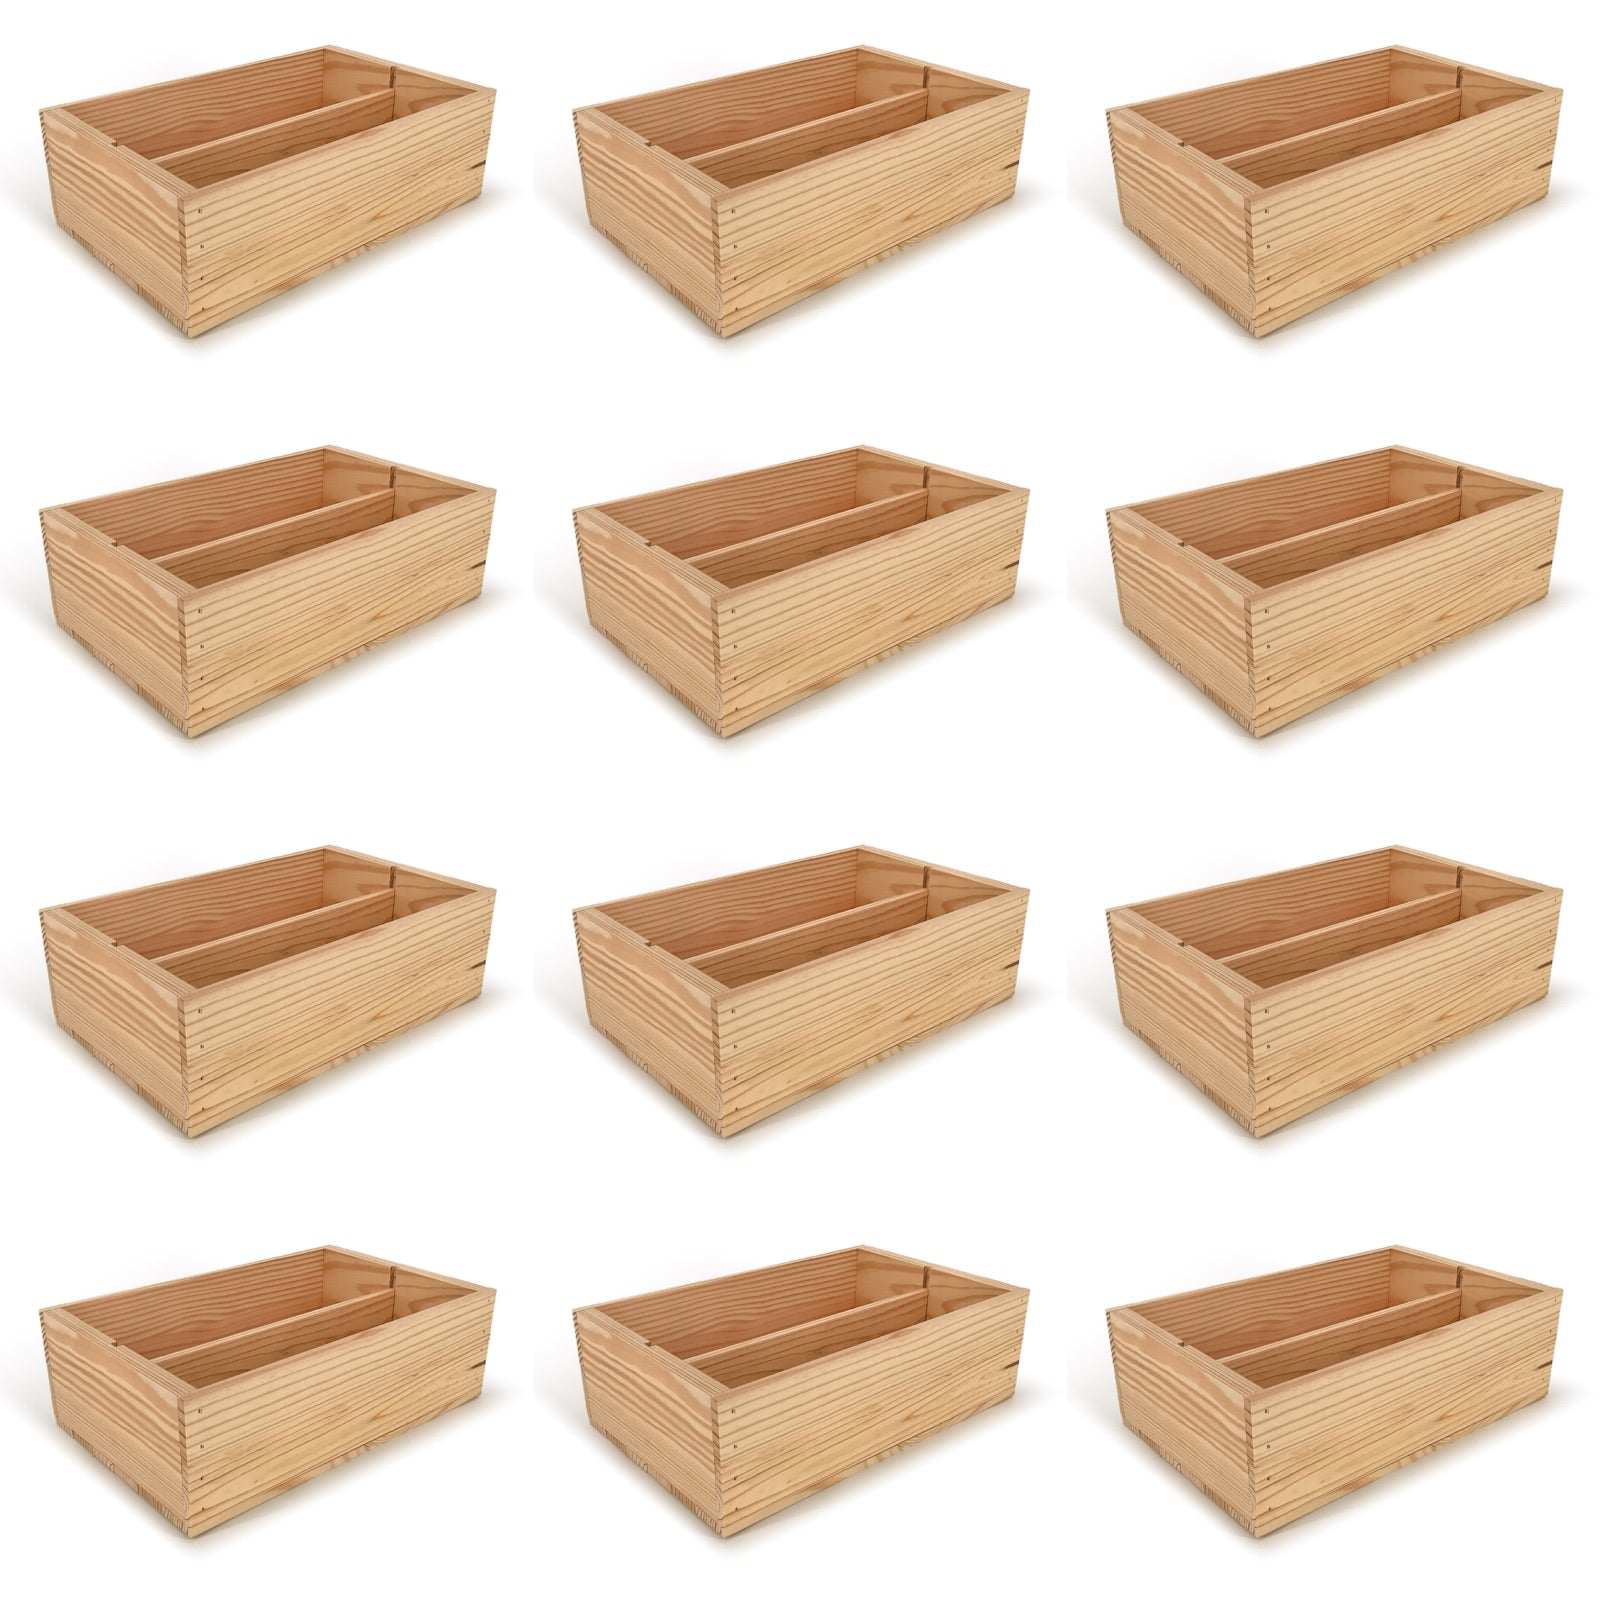 12 Two Bottle Wine Crate Boxes 14x9x4.5, 6-WB-14-9-4.5-NX-NW-NL,  12-WB-14-9-4.5-NX-NW-NL,  24-WB-14-9-4.5-NX-NW-NL,  48-WB-14-9-4.5-NX-NW-NL,  96-WB-14-9-4.5-NX-NW-NL